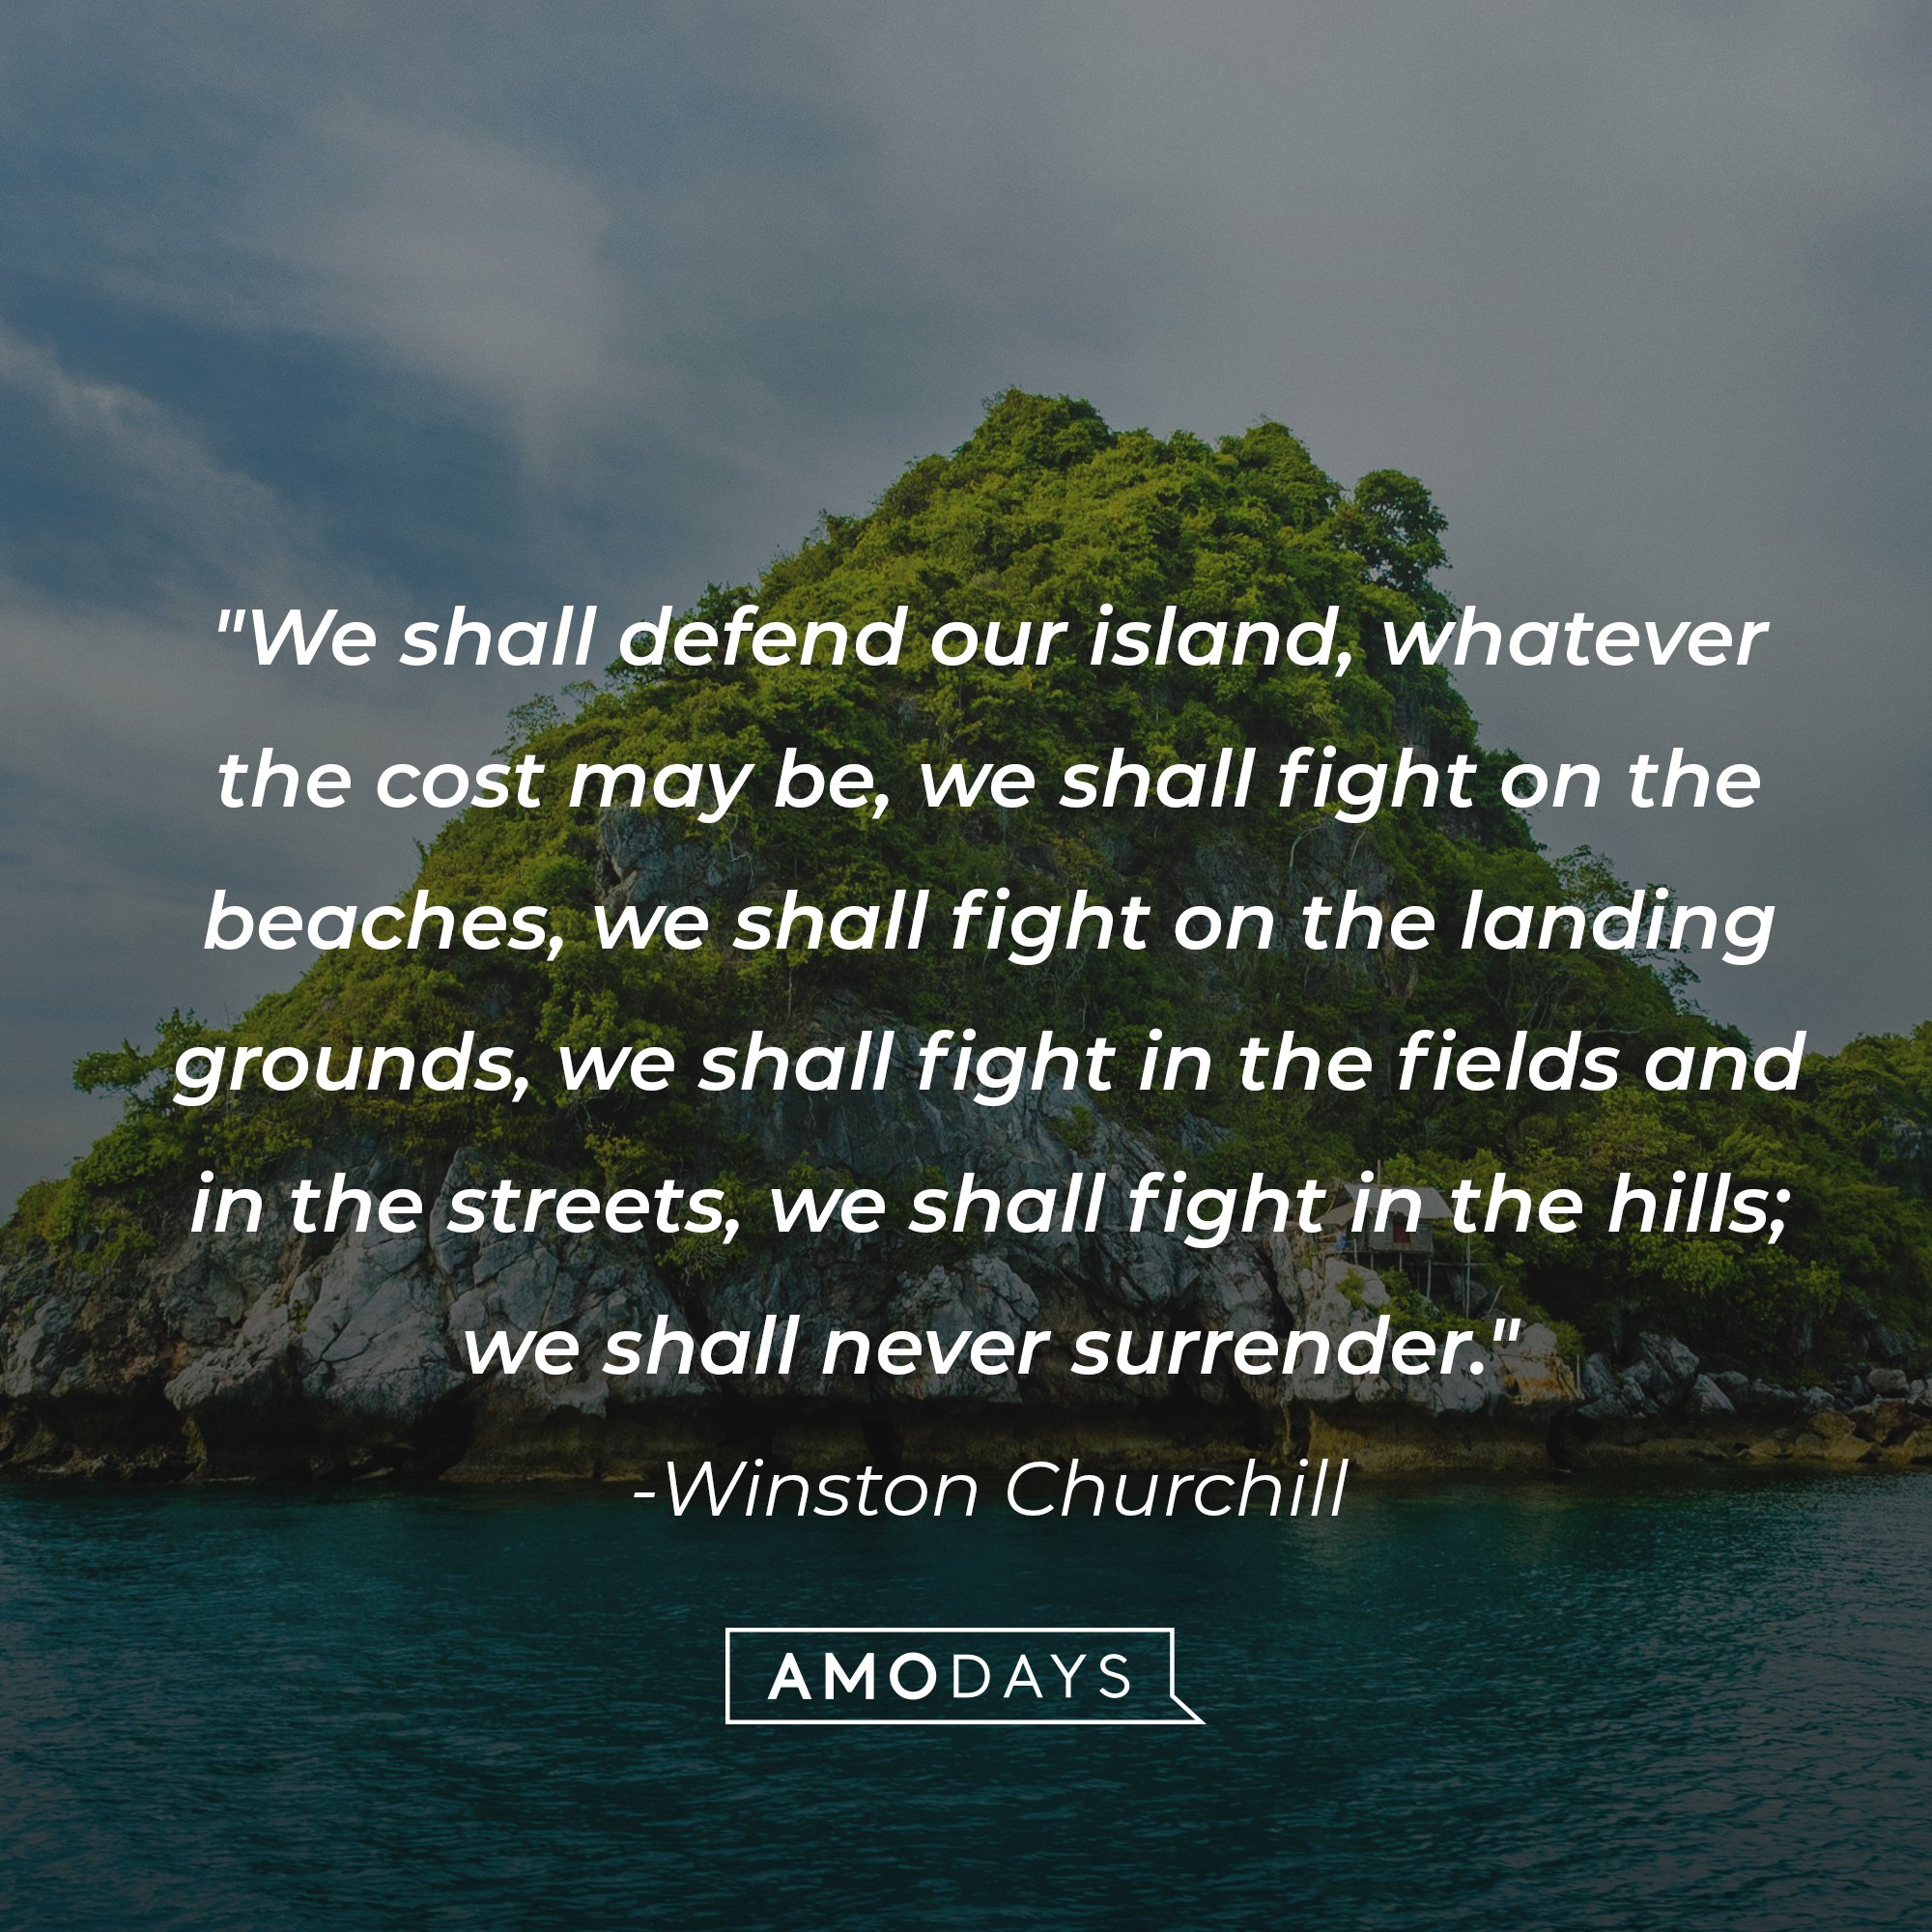 Winston Churchill's quote: We shall defend our island, whatever the cost may be, we shall fight on the beaches, we shall fight on the landing grounds, we shall fight in the fields and in the streets, we shall fight in the hills; we shall never surrender." | Image: AmoDays